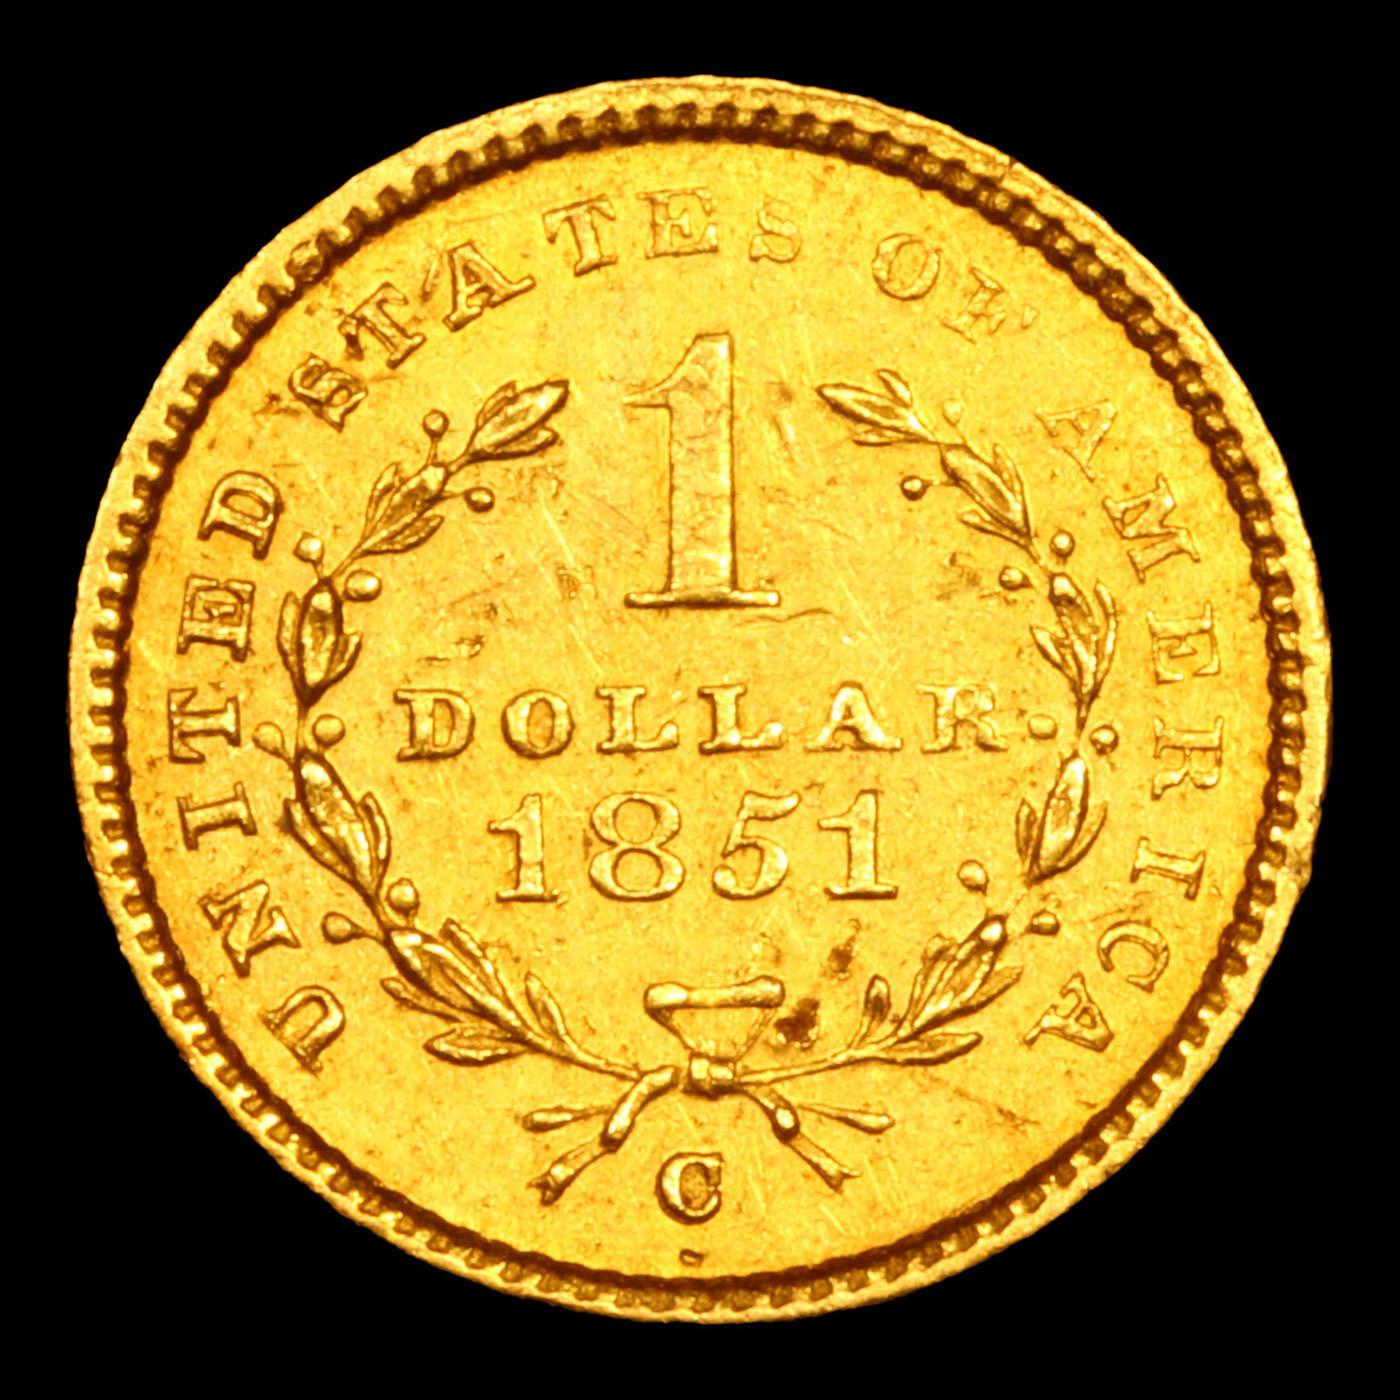 ***Auction Highlight*** 1851-c Gold Dollar TY-I Charlotte Variety-3 1 Graded ms63+ BY SEGS (fc)